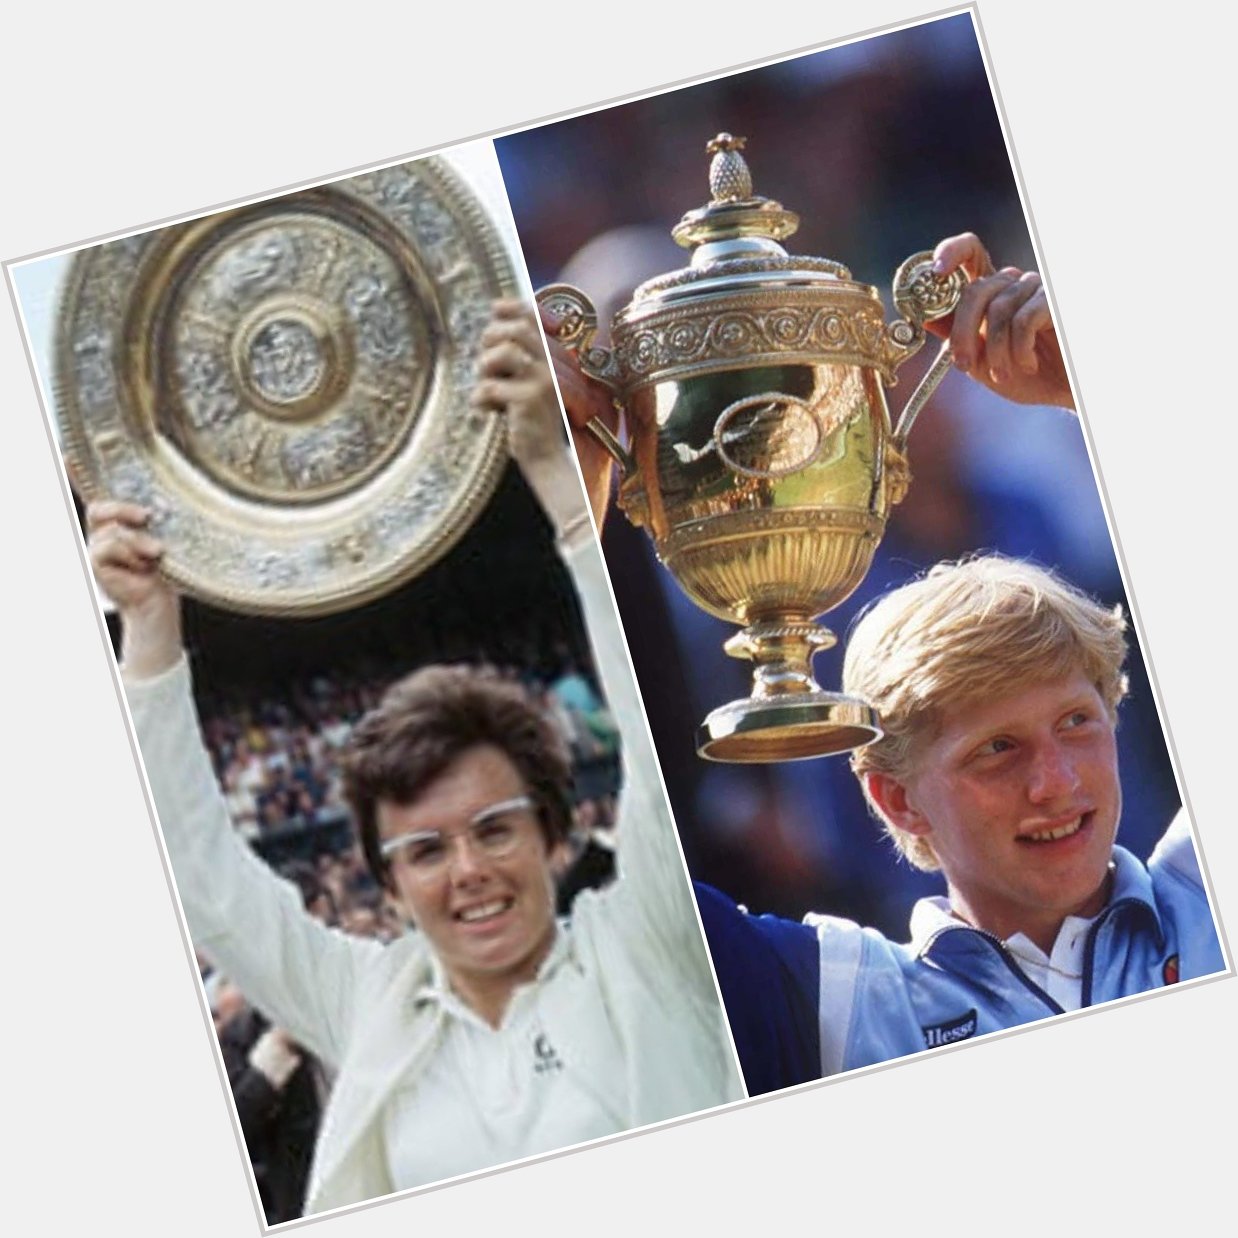 Happy birthday today to two amazing Wimbledon champions....Billie Jean King and Boris Becker! 